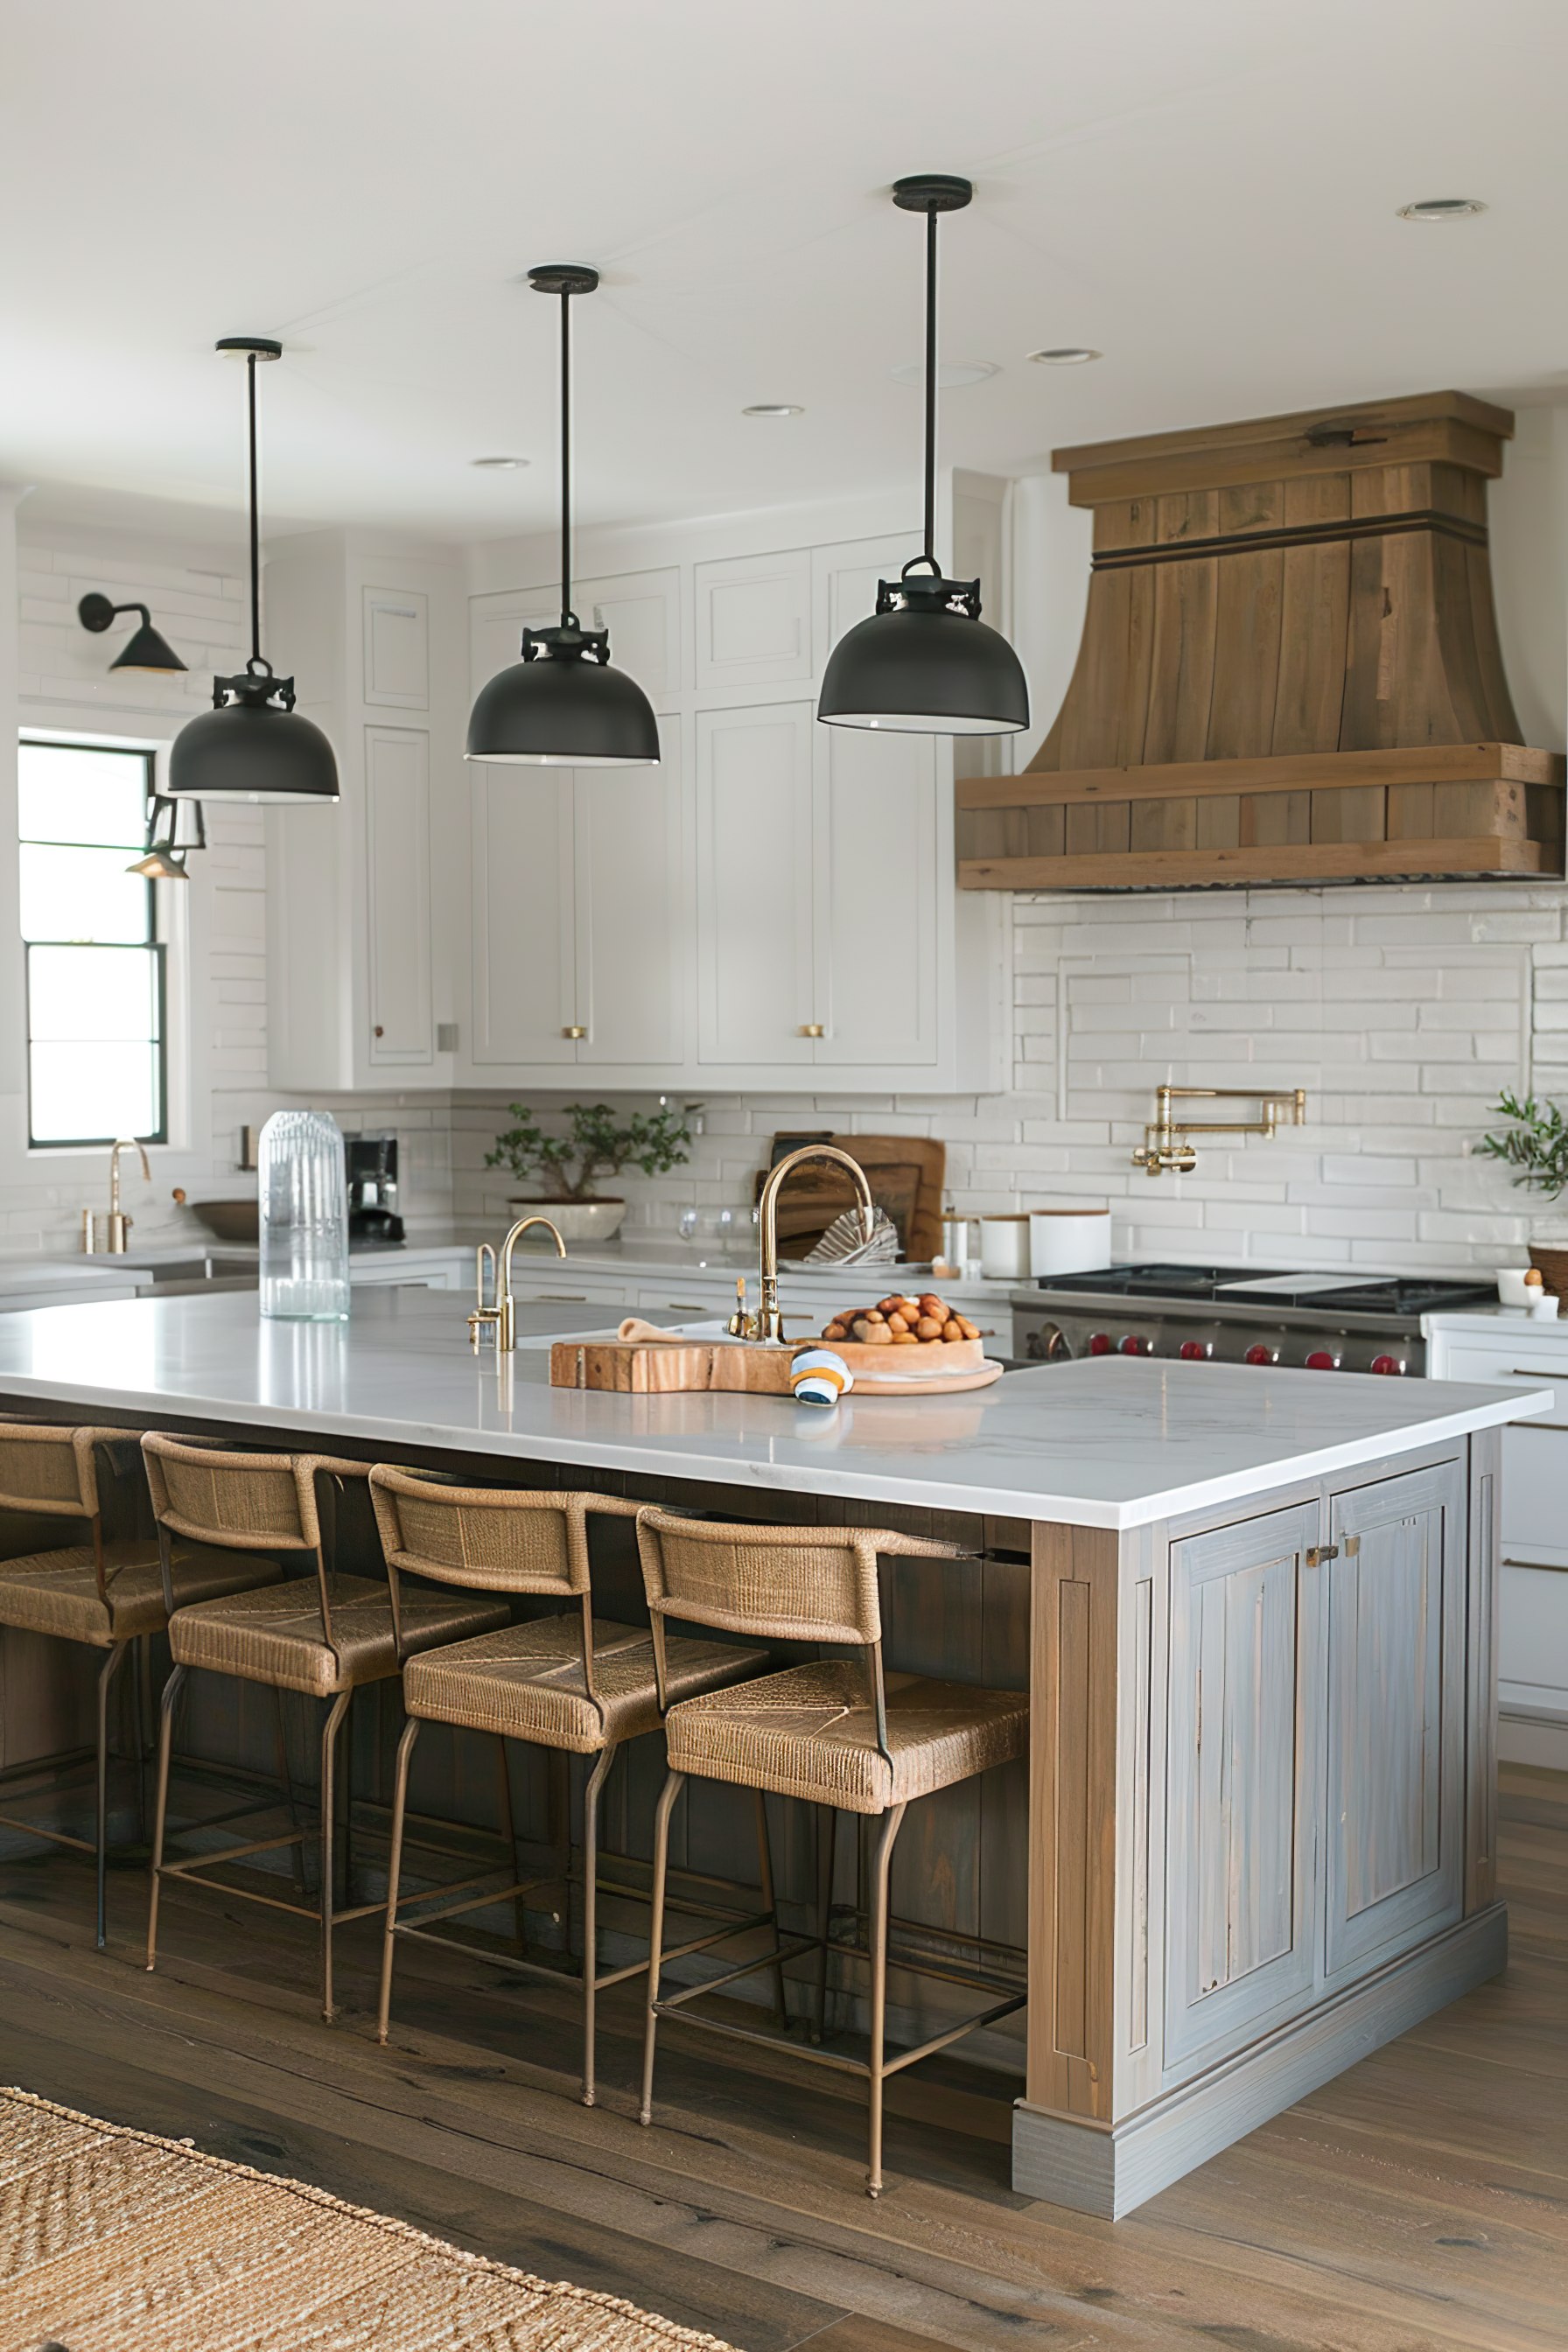 Modern kitchen interior with white cabinetry, wooden accents, and a kitchen island with rattan bar stools under pendant lights.